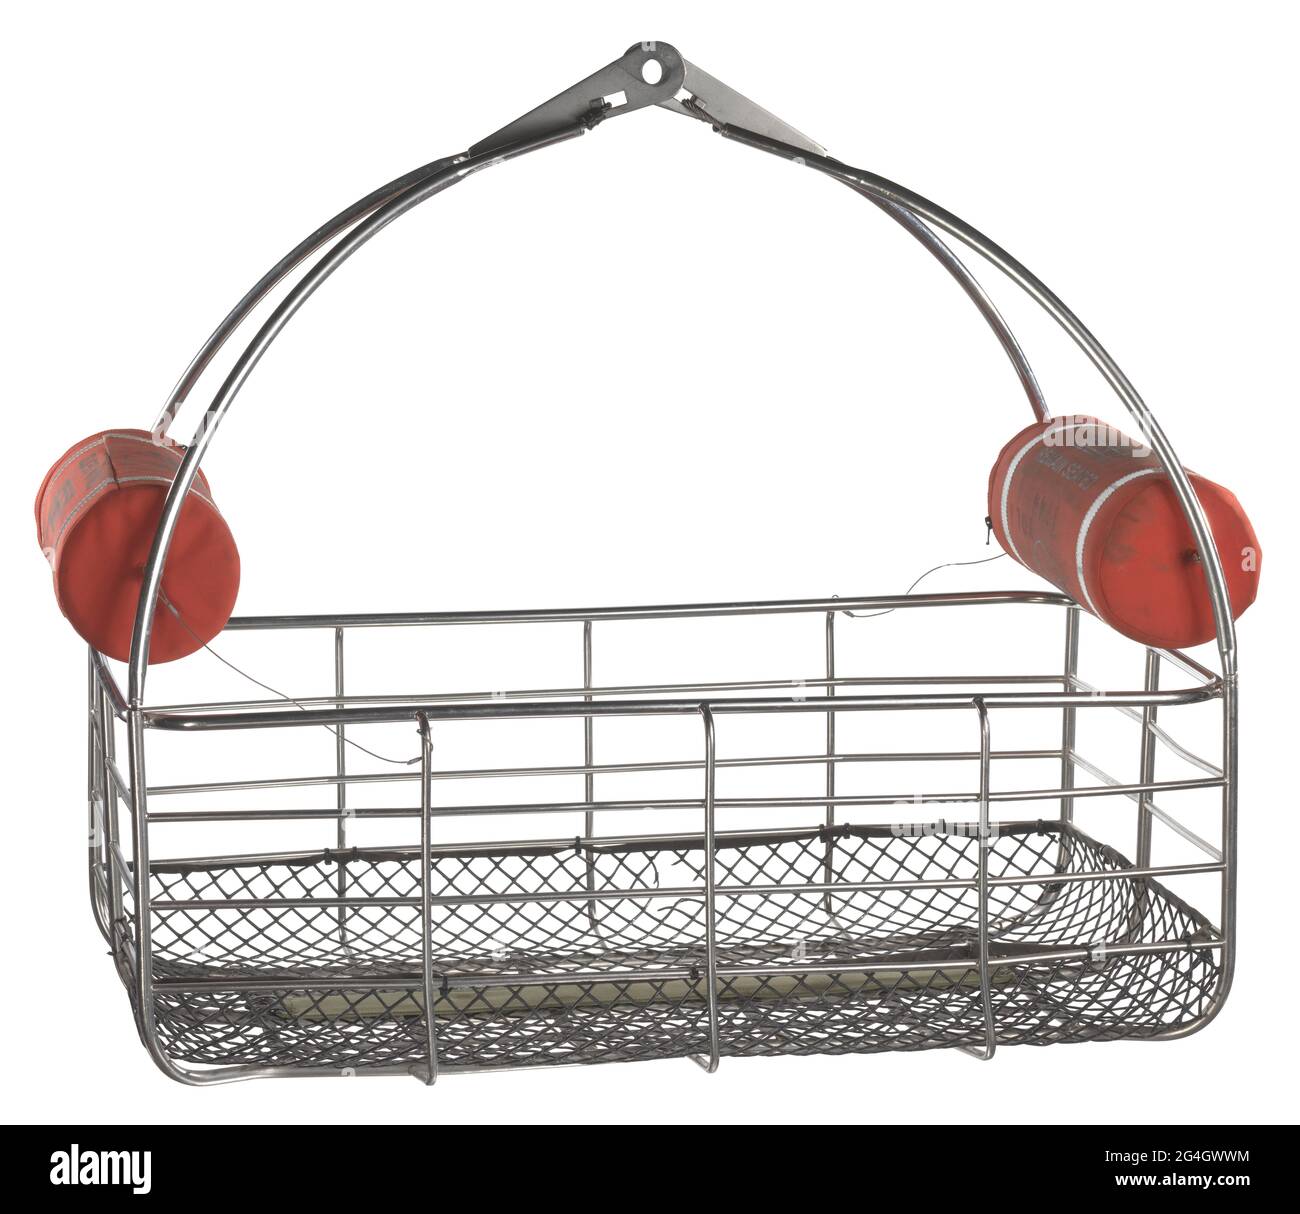 In August 2005, Atlantic Hurricane Katrina caused over 1,800 deaths and $125 billion in damage, particularly in the city of New Orleans and the surrounding areas. There were claims that race, class, and other factors could have contributed to delays in government response. The rescue basket is constructed almost entirely of welded type 304 stainless steel. The bail assembly folds into the basket for compact stowage. The structural integrity of the bail is provided by &#xbc;&quot; stainless steel cable acting as the hinge point. The bottom is enclosed with a plastic, semi-rigid net liner with 1 Stock Photo